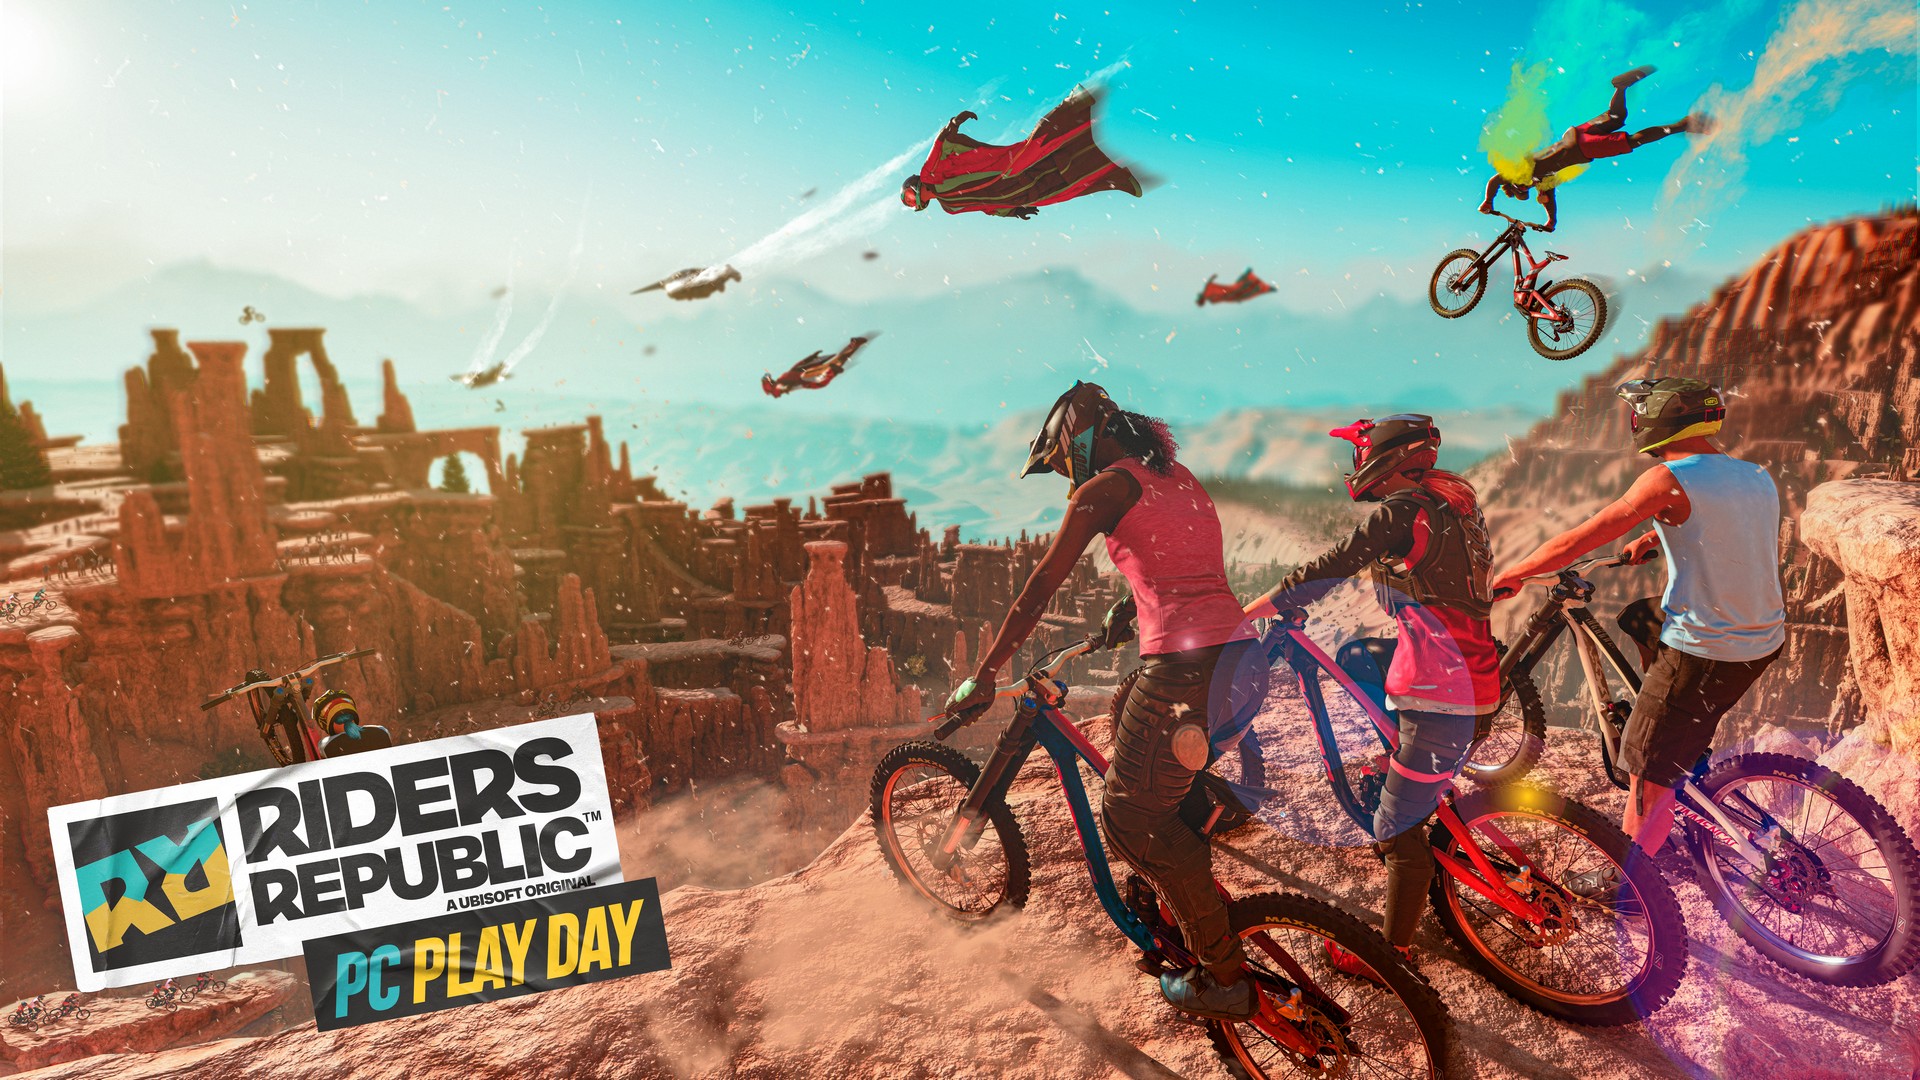 PC Play Day For Riders Republic Available On October 12, Exclusively On Ubisoft Connect PC